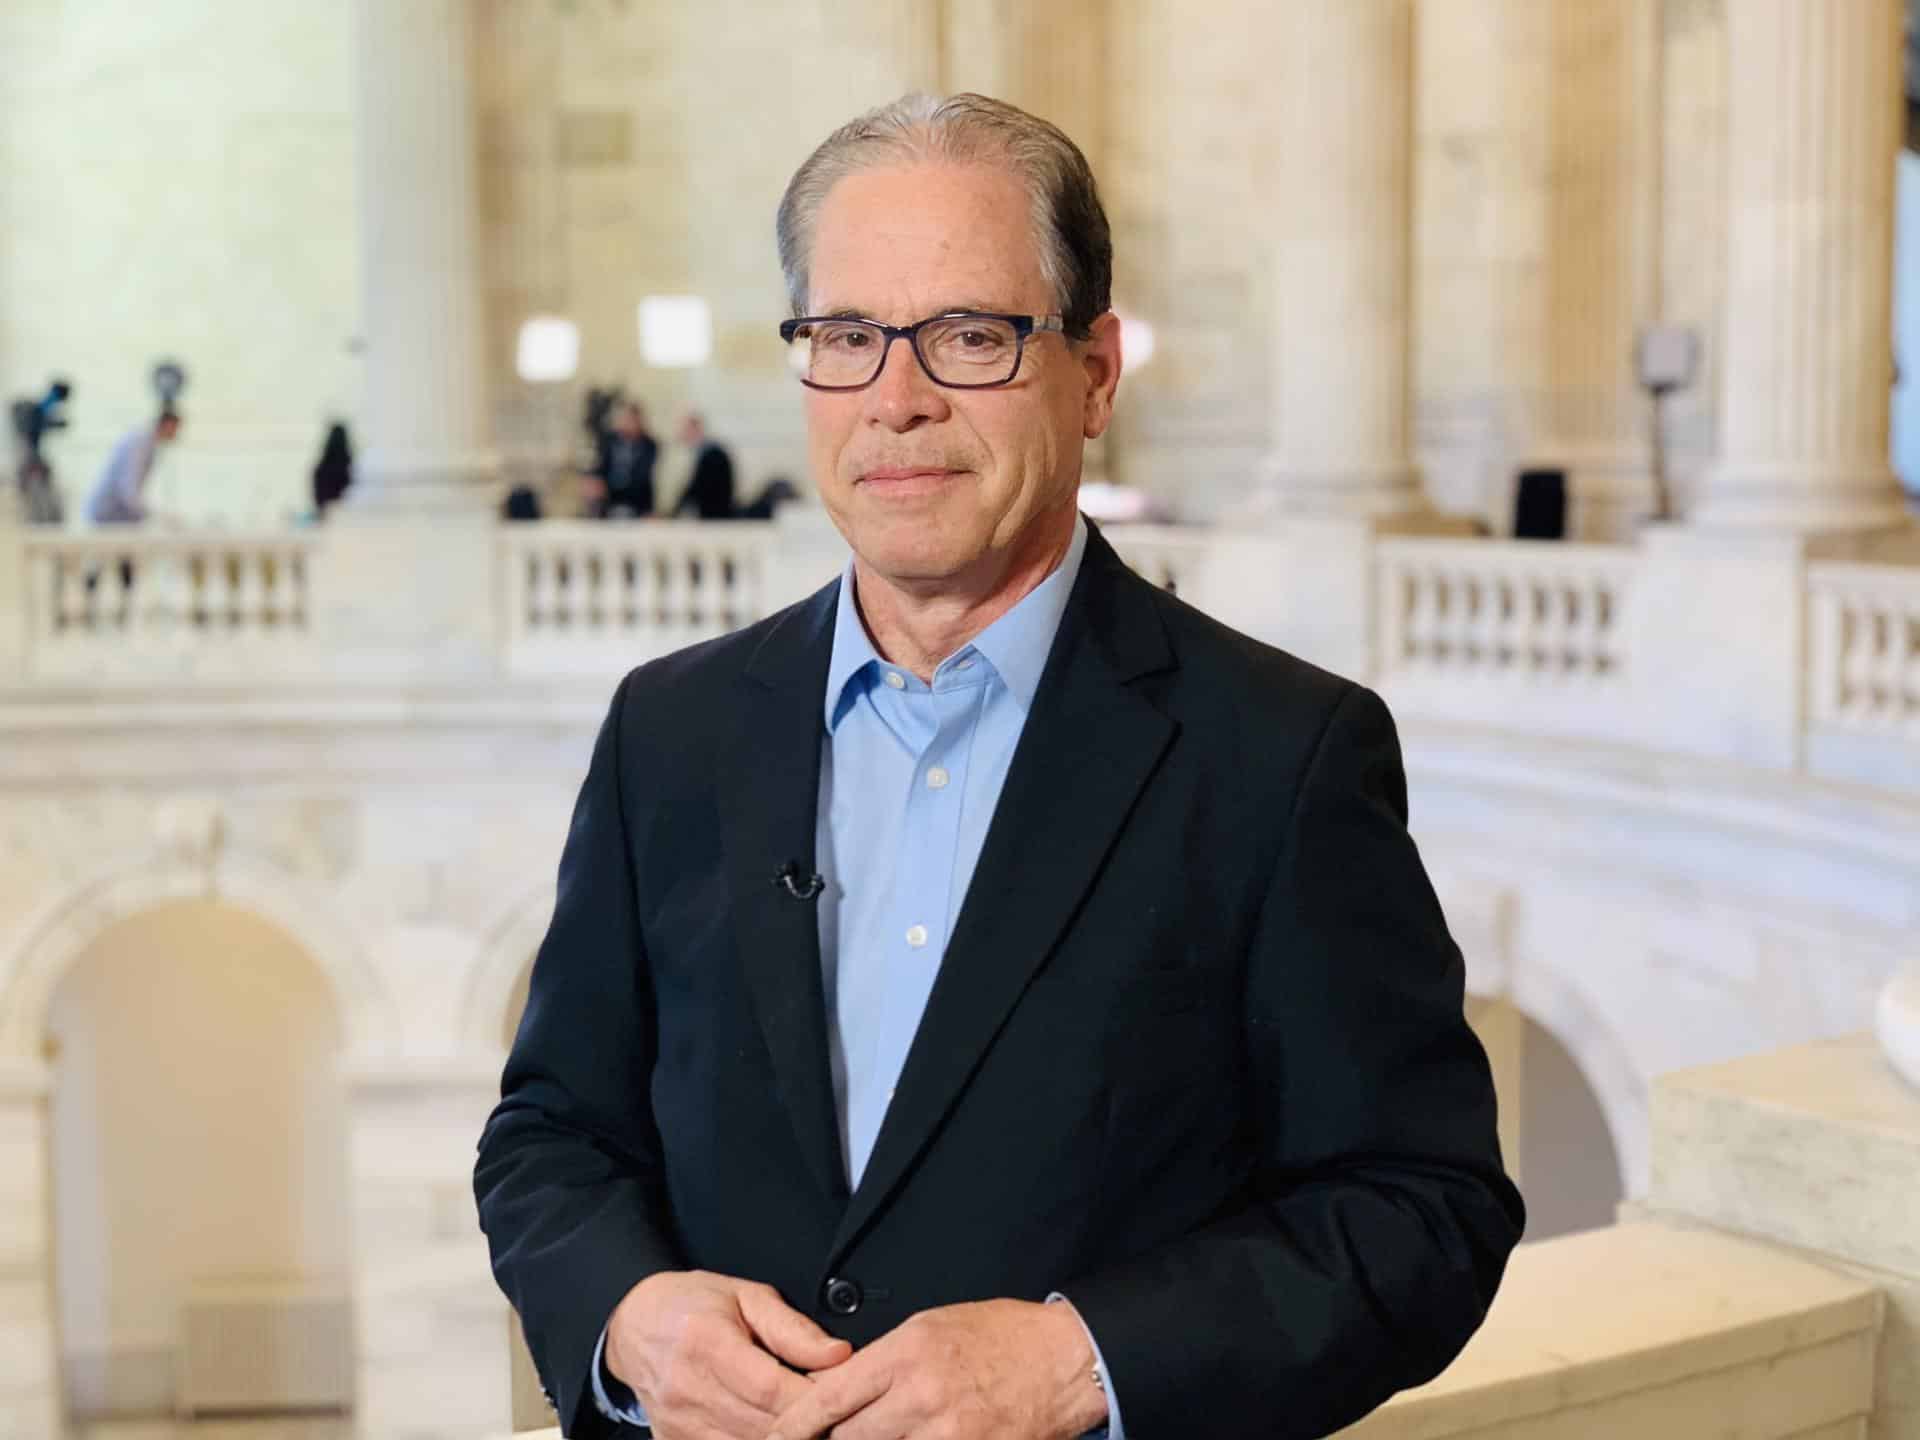 Senator Mike Braun calls for an end to tax breaks for abortion under the guise of healthcare